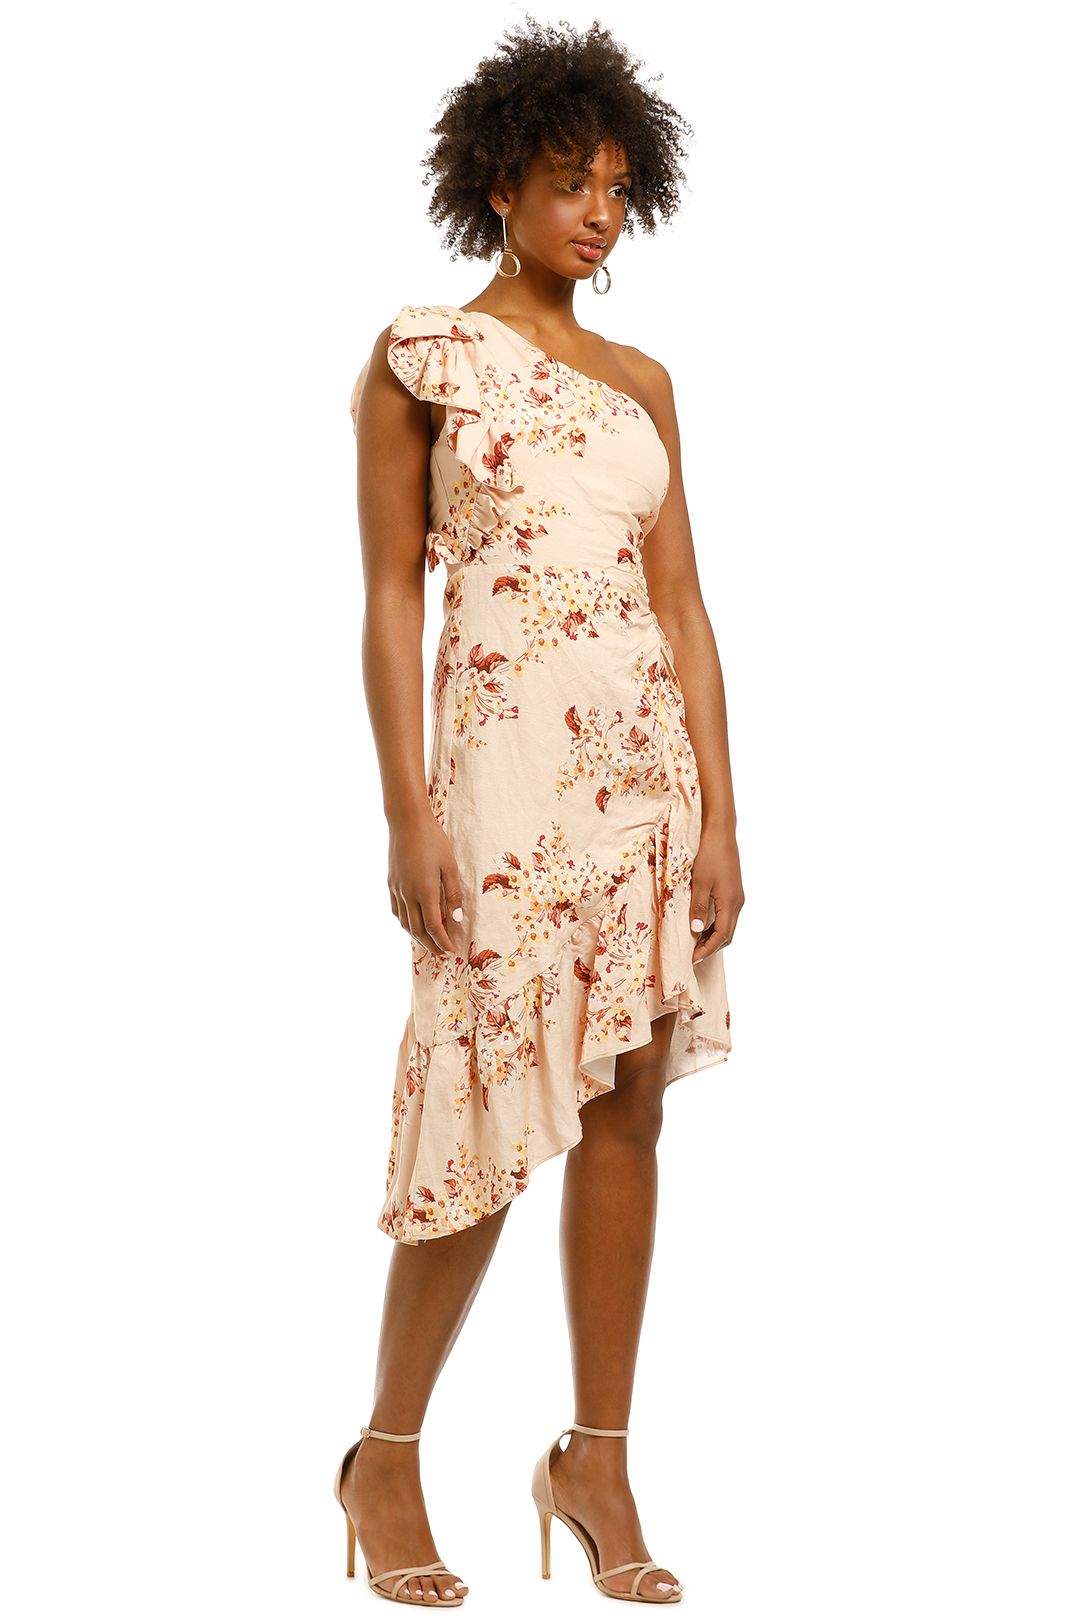 Ministry-of-Style-Inner-Bloom-Asymmetrical-Dress-Floral-Print-Side